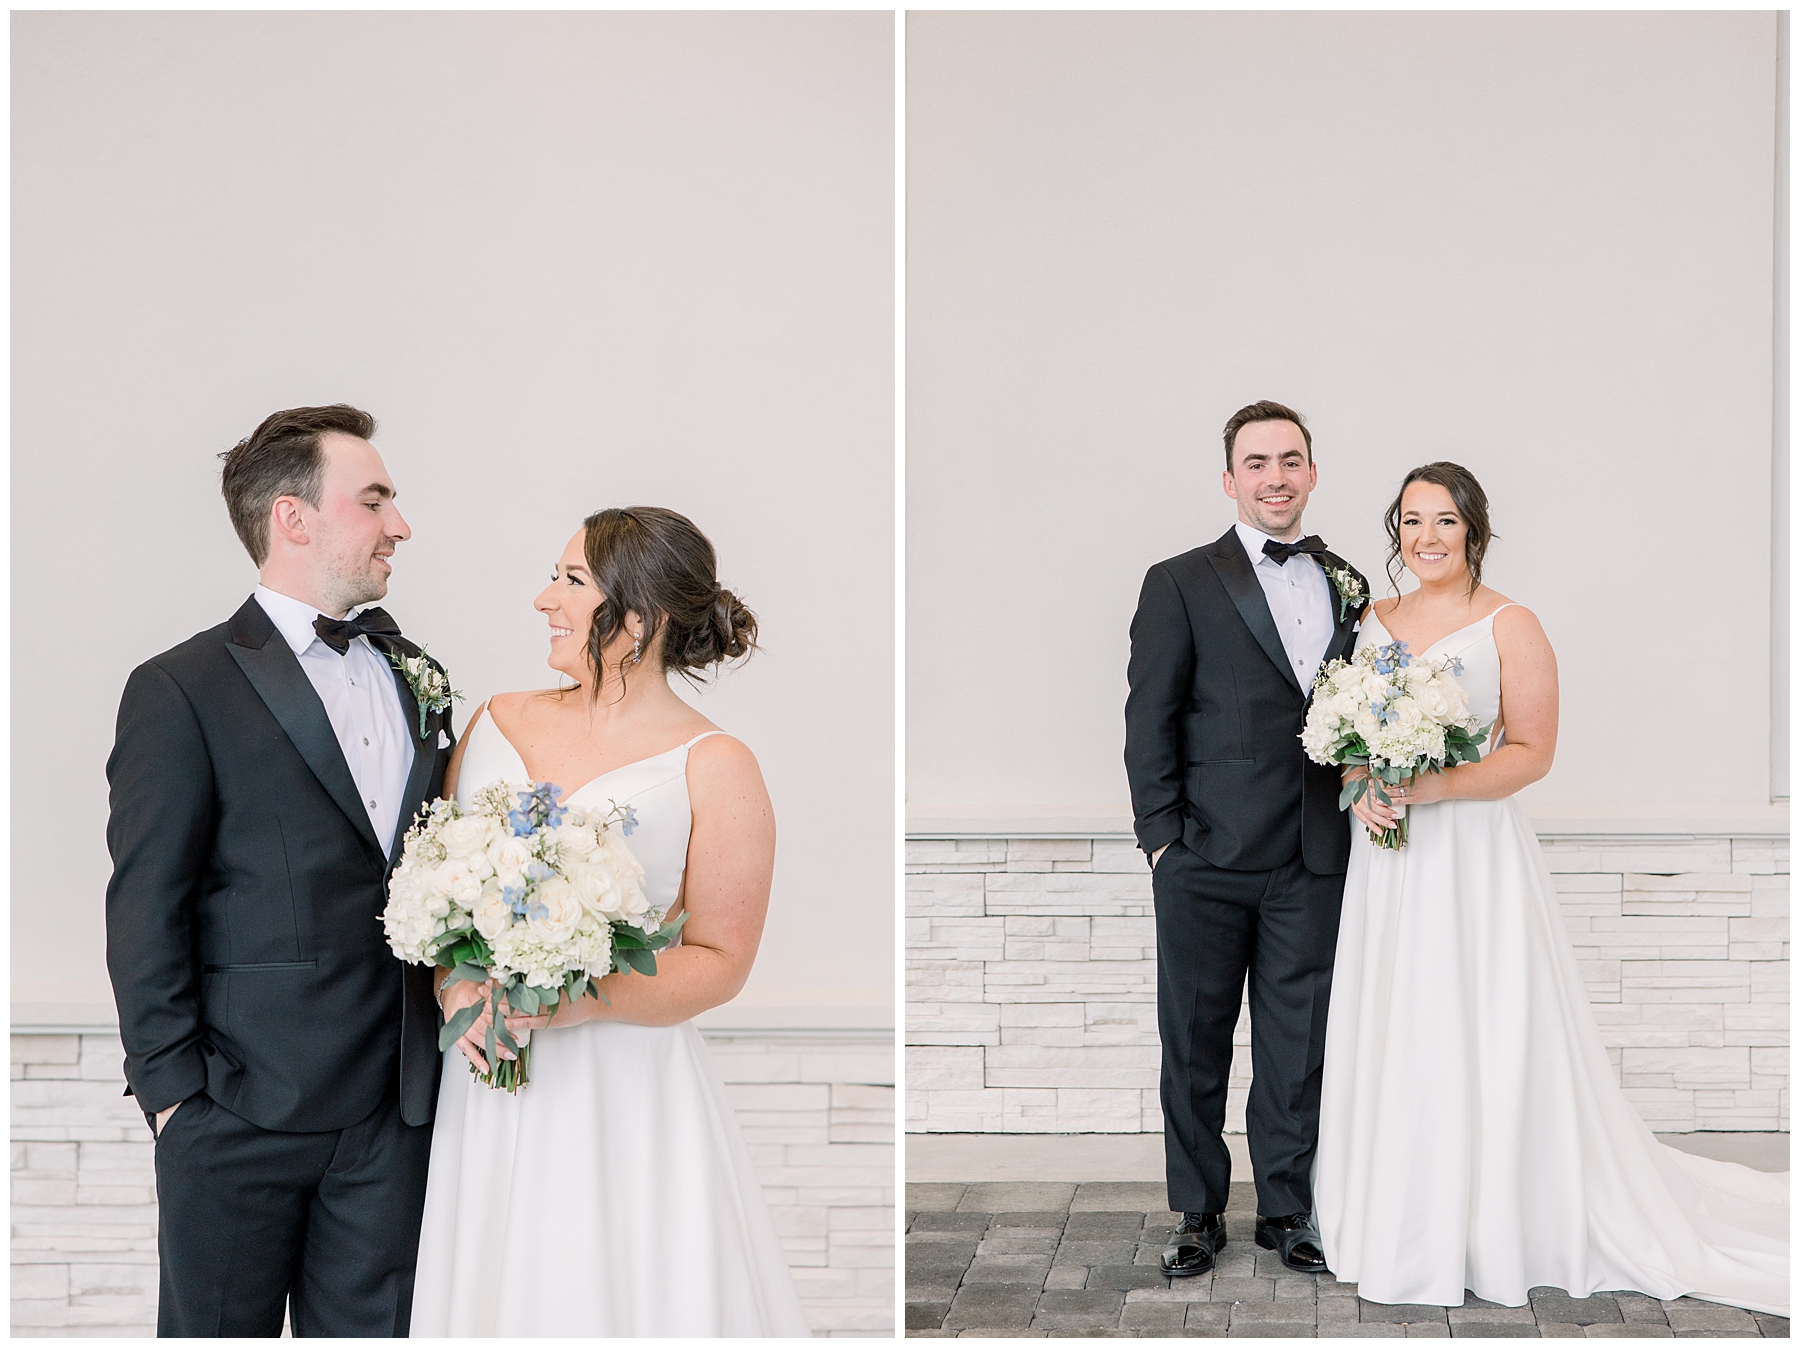 Lakeview Pavilion Wedding in Foxborough, MA 